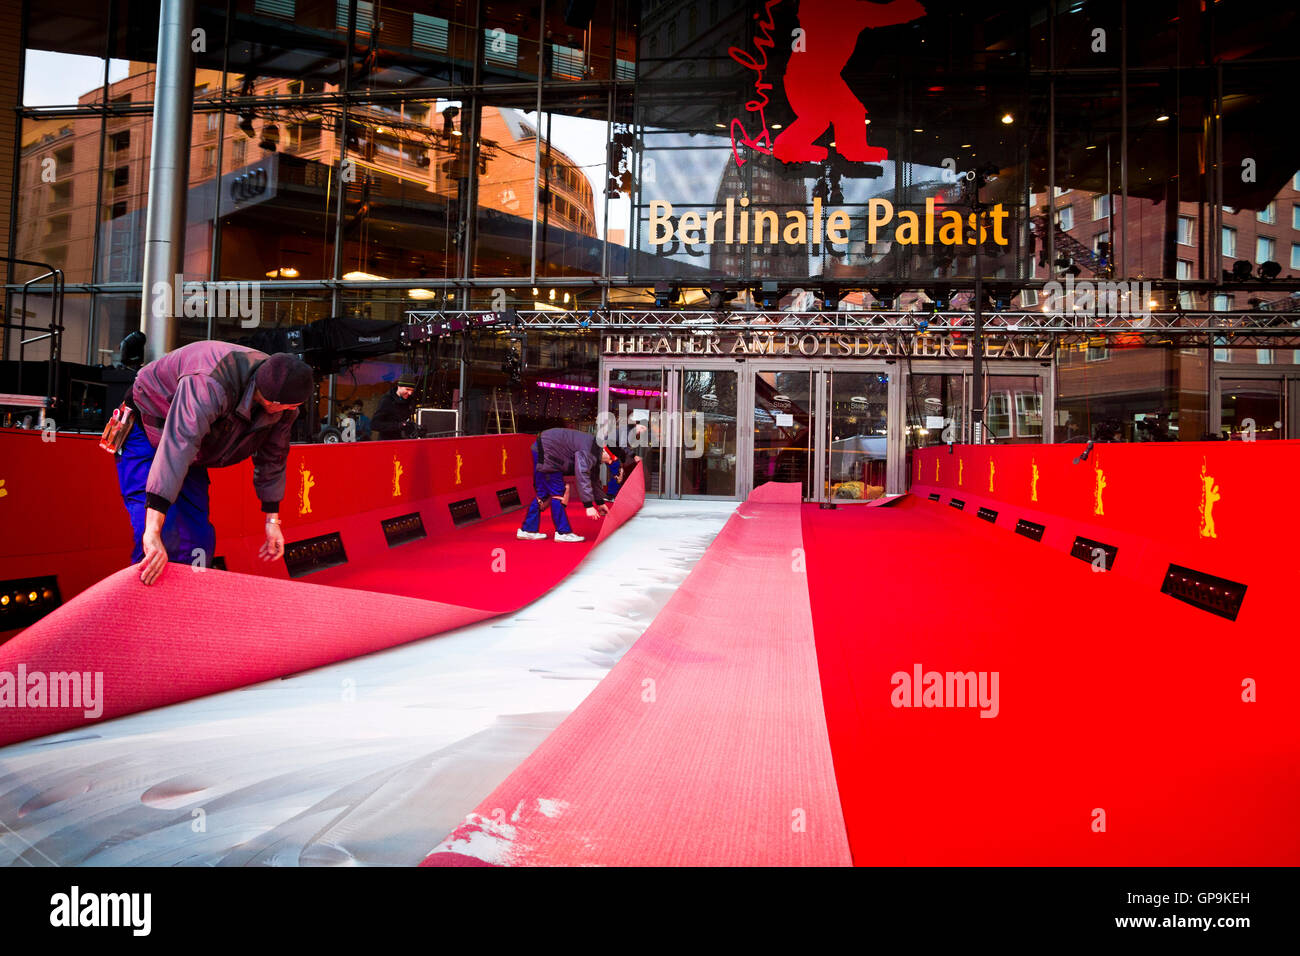 Workers securing the red carpet outside the Potsdamer Platz Theatre in Berlin, Germany. Stock Photo